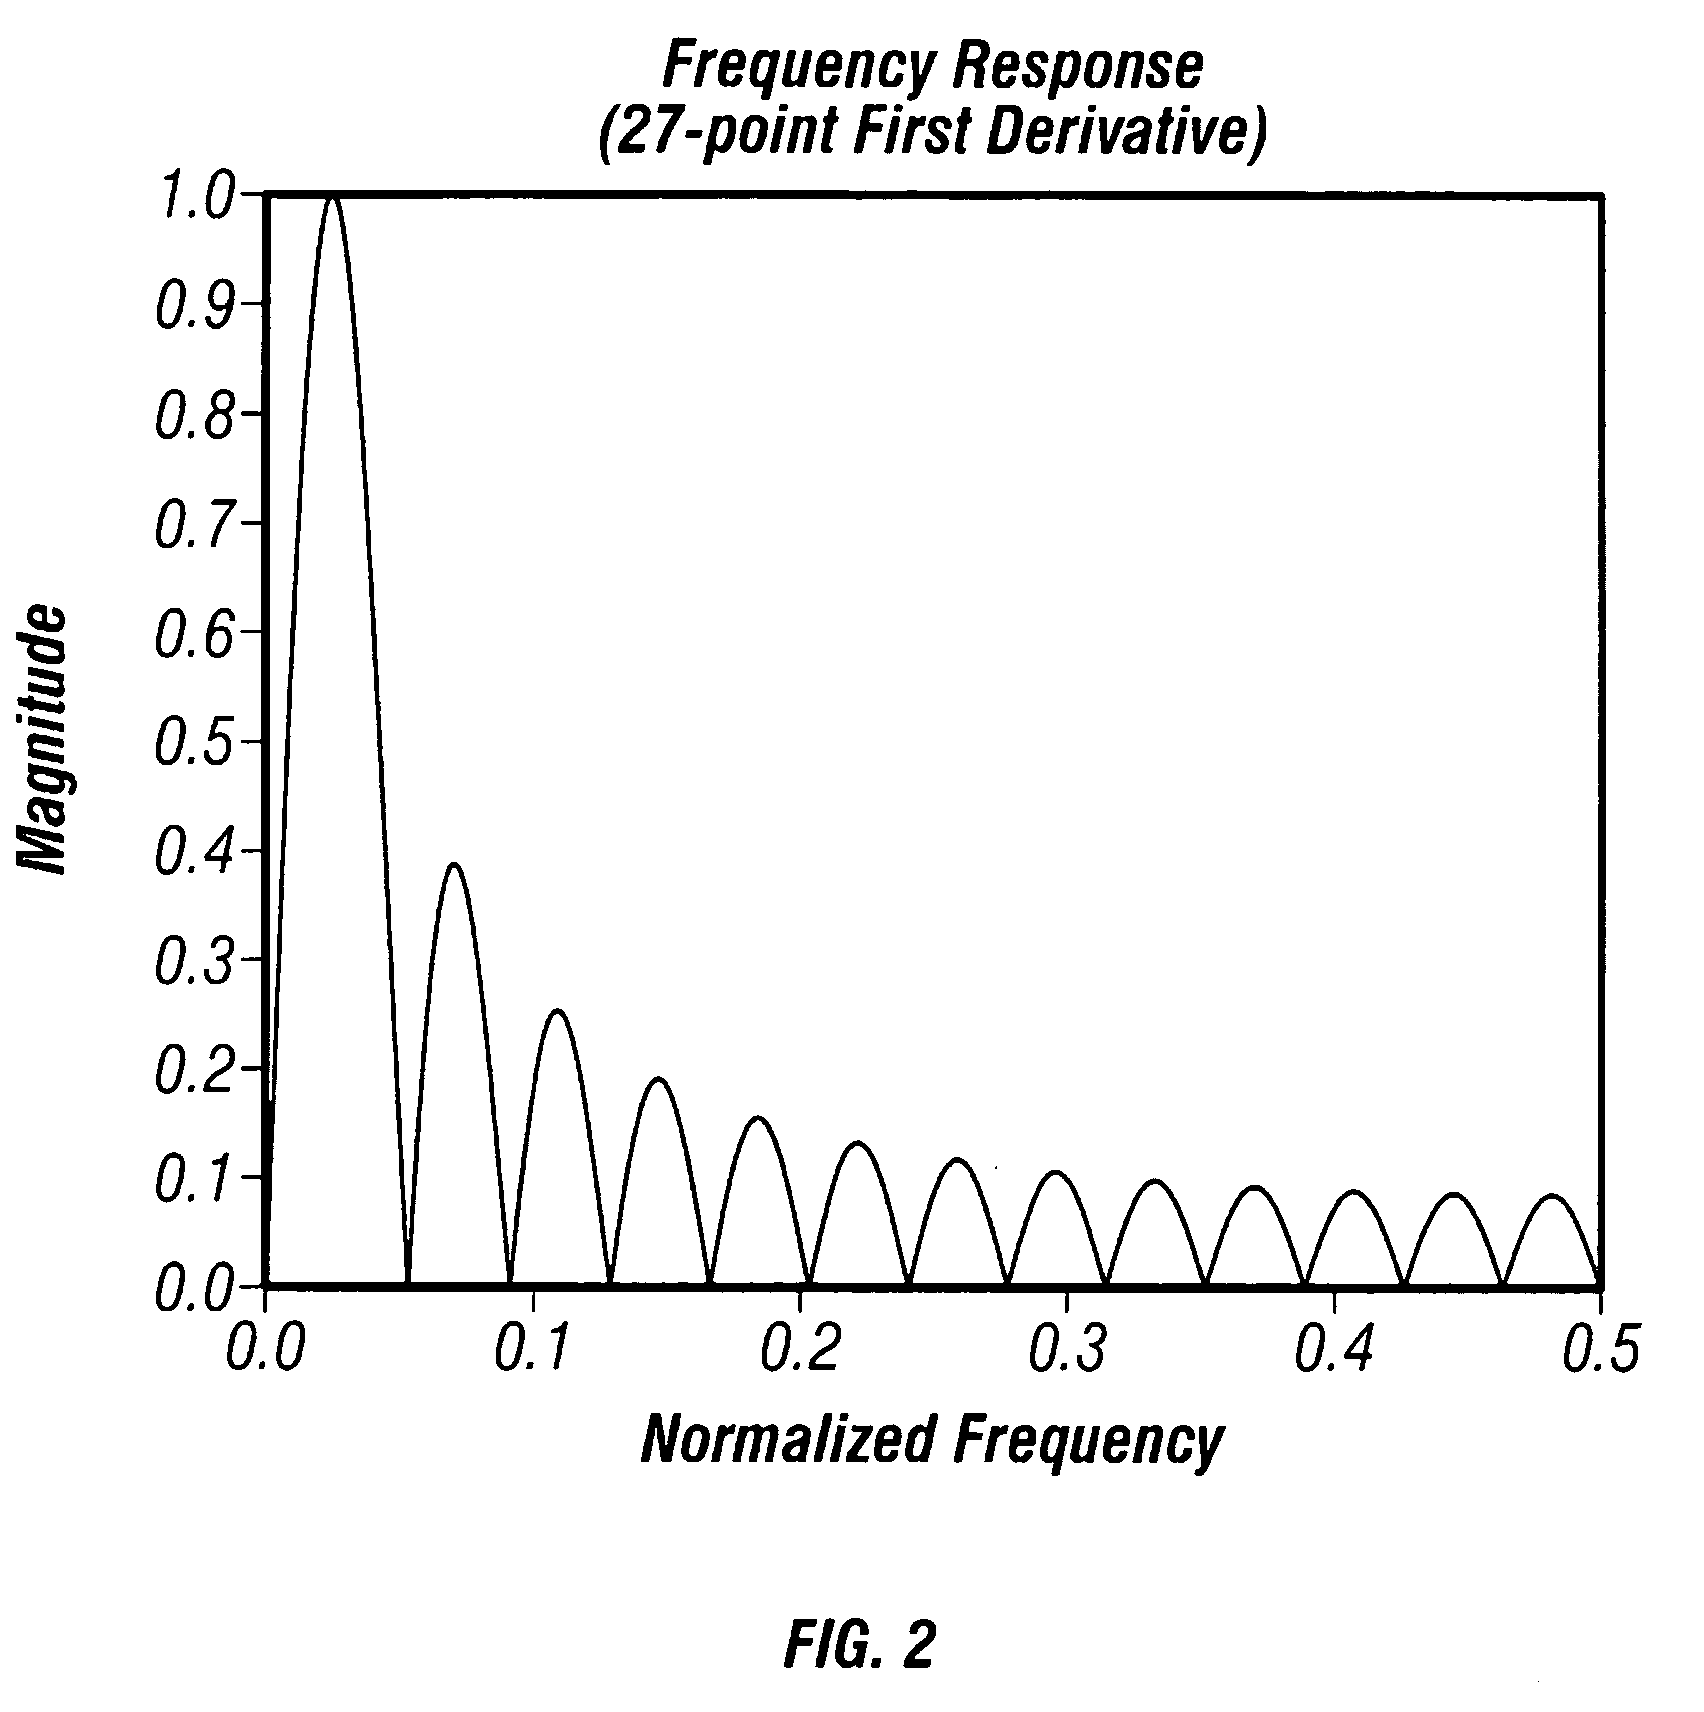 Analyte filter method and apparatus